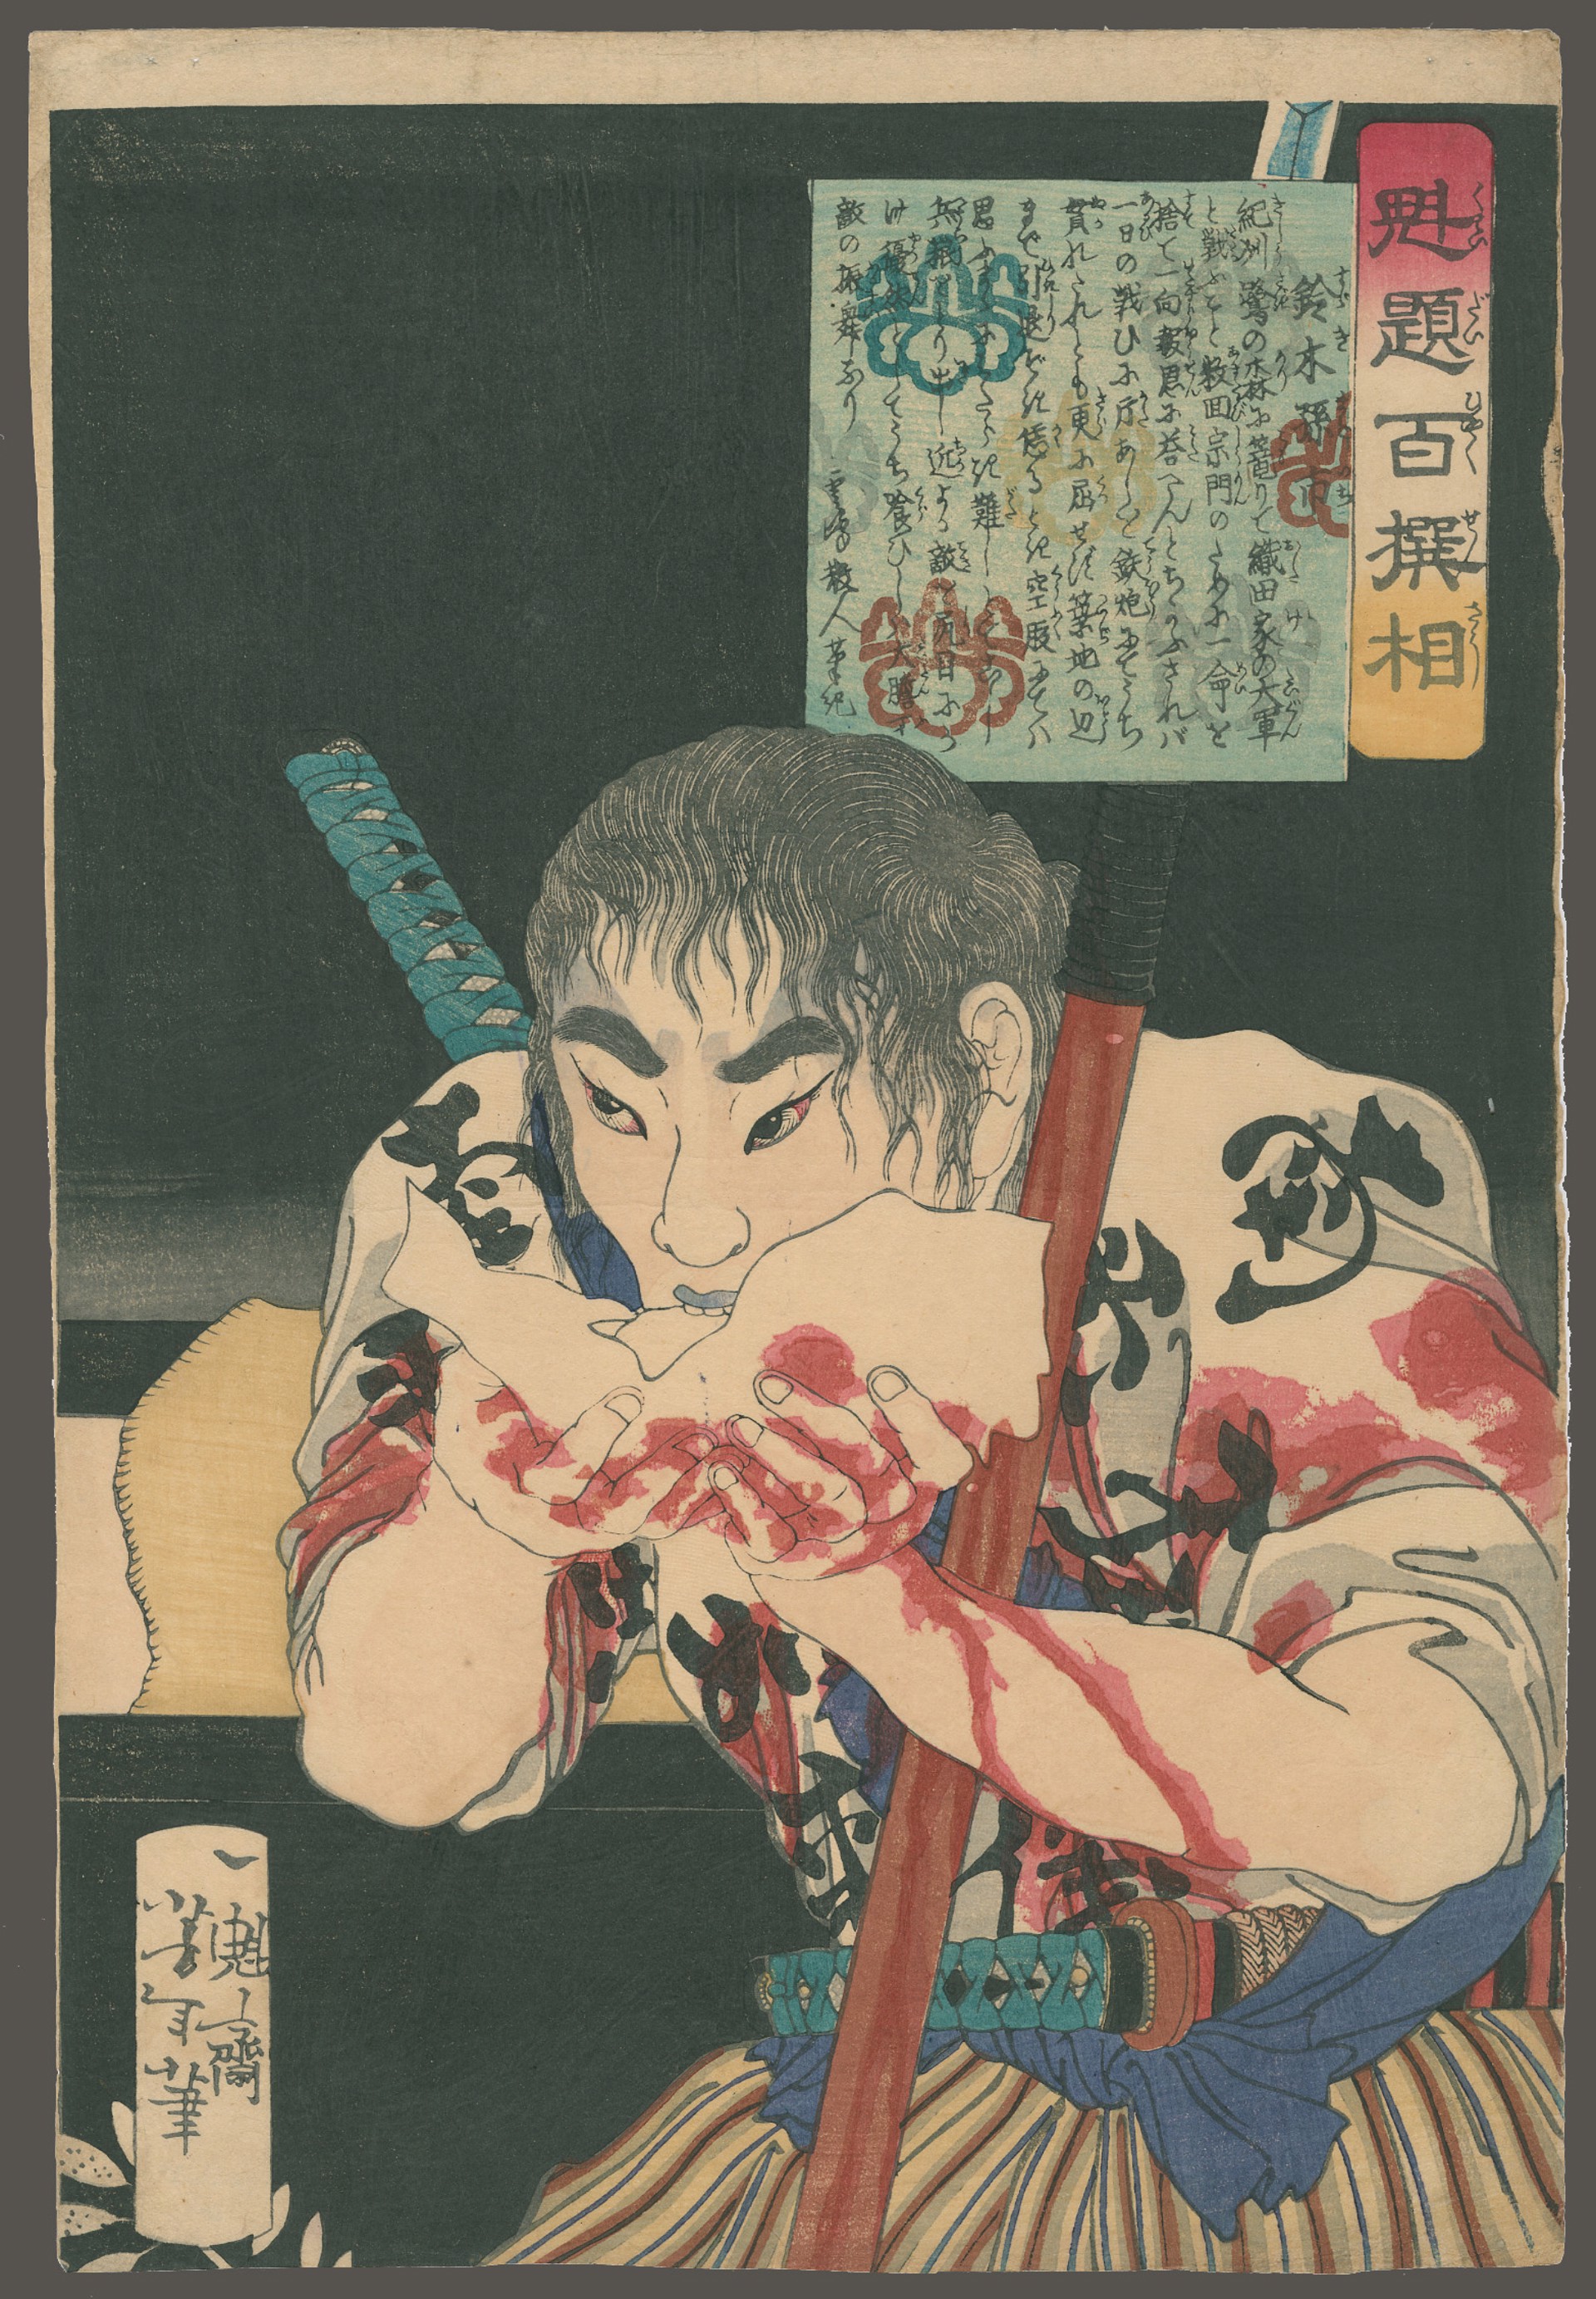 #45 Suzuki Magoichi Leaning on his Spear Eating a Rice Ball Selection of 100 Warriors by Yoshitoshi